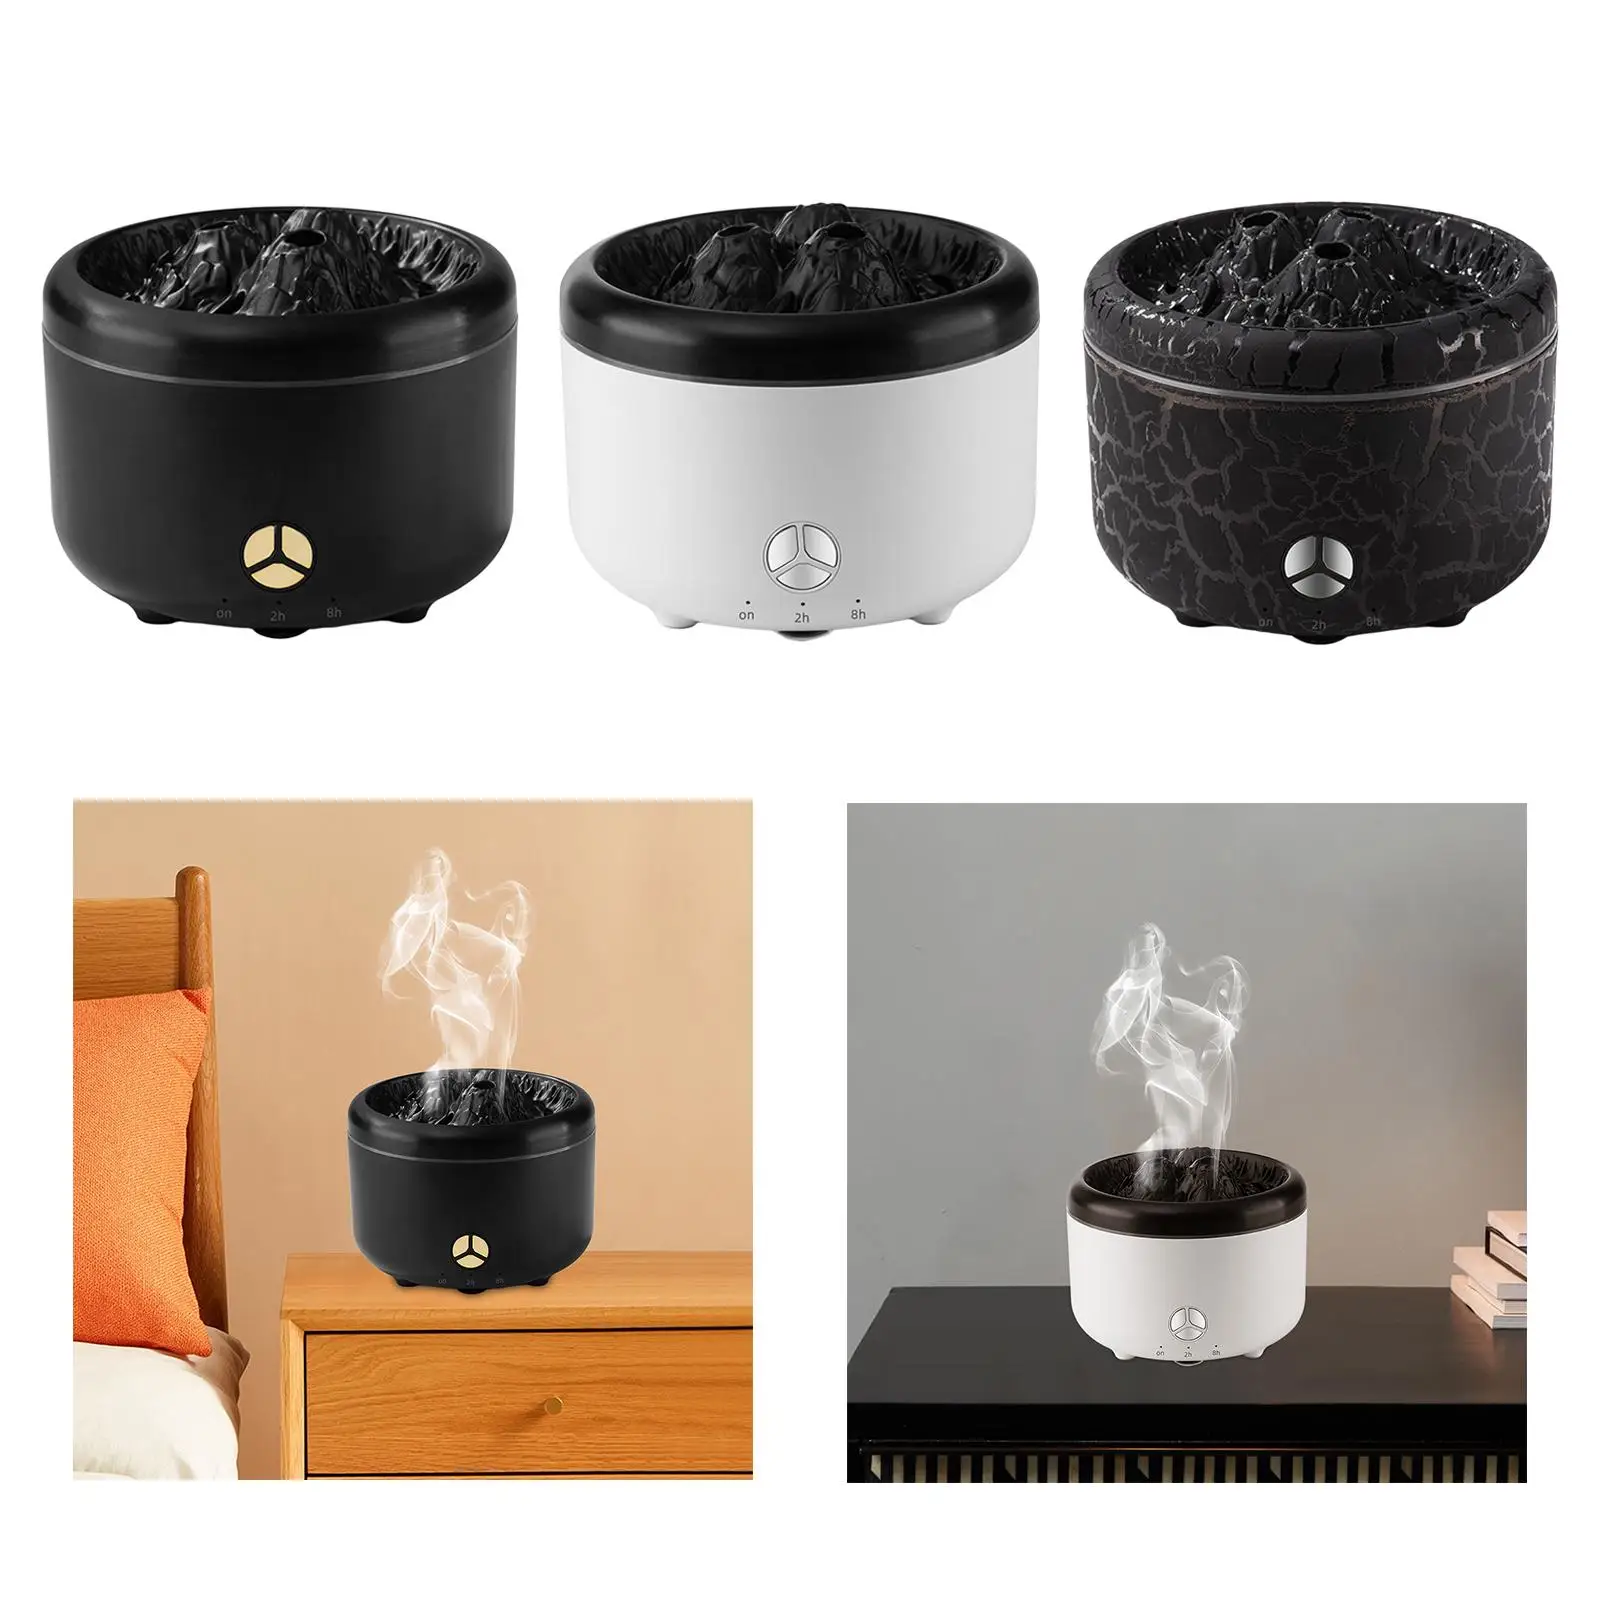 Flame Aromatherapy Humidifier 500ml Auto Shut Off Sturdy 2 Flame Light Colors Aroma Diffuser for Desktop Bedroom Home Yoga Decor